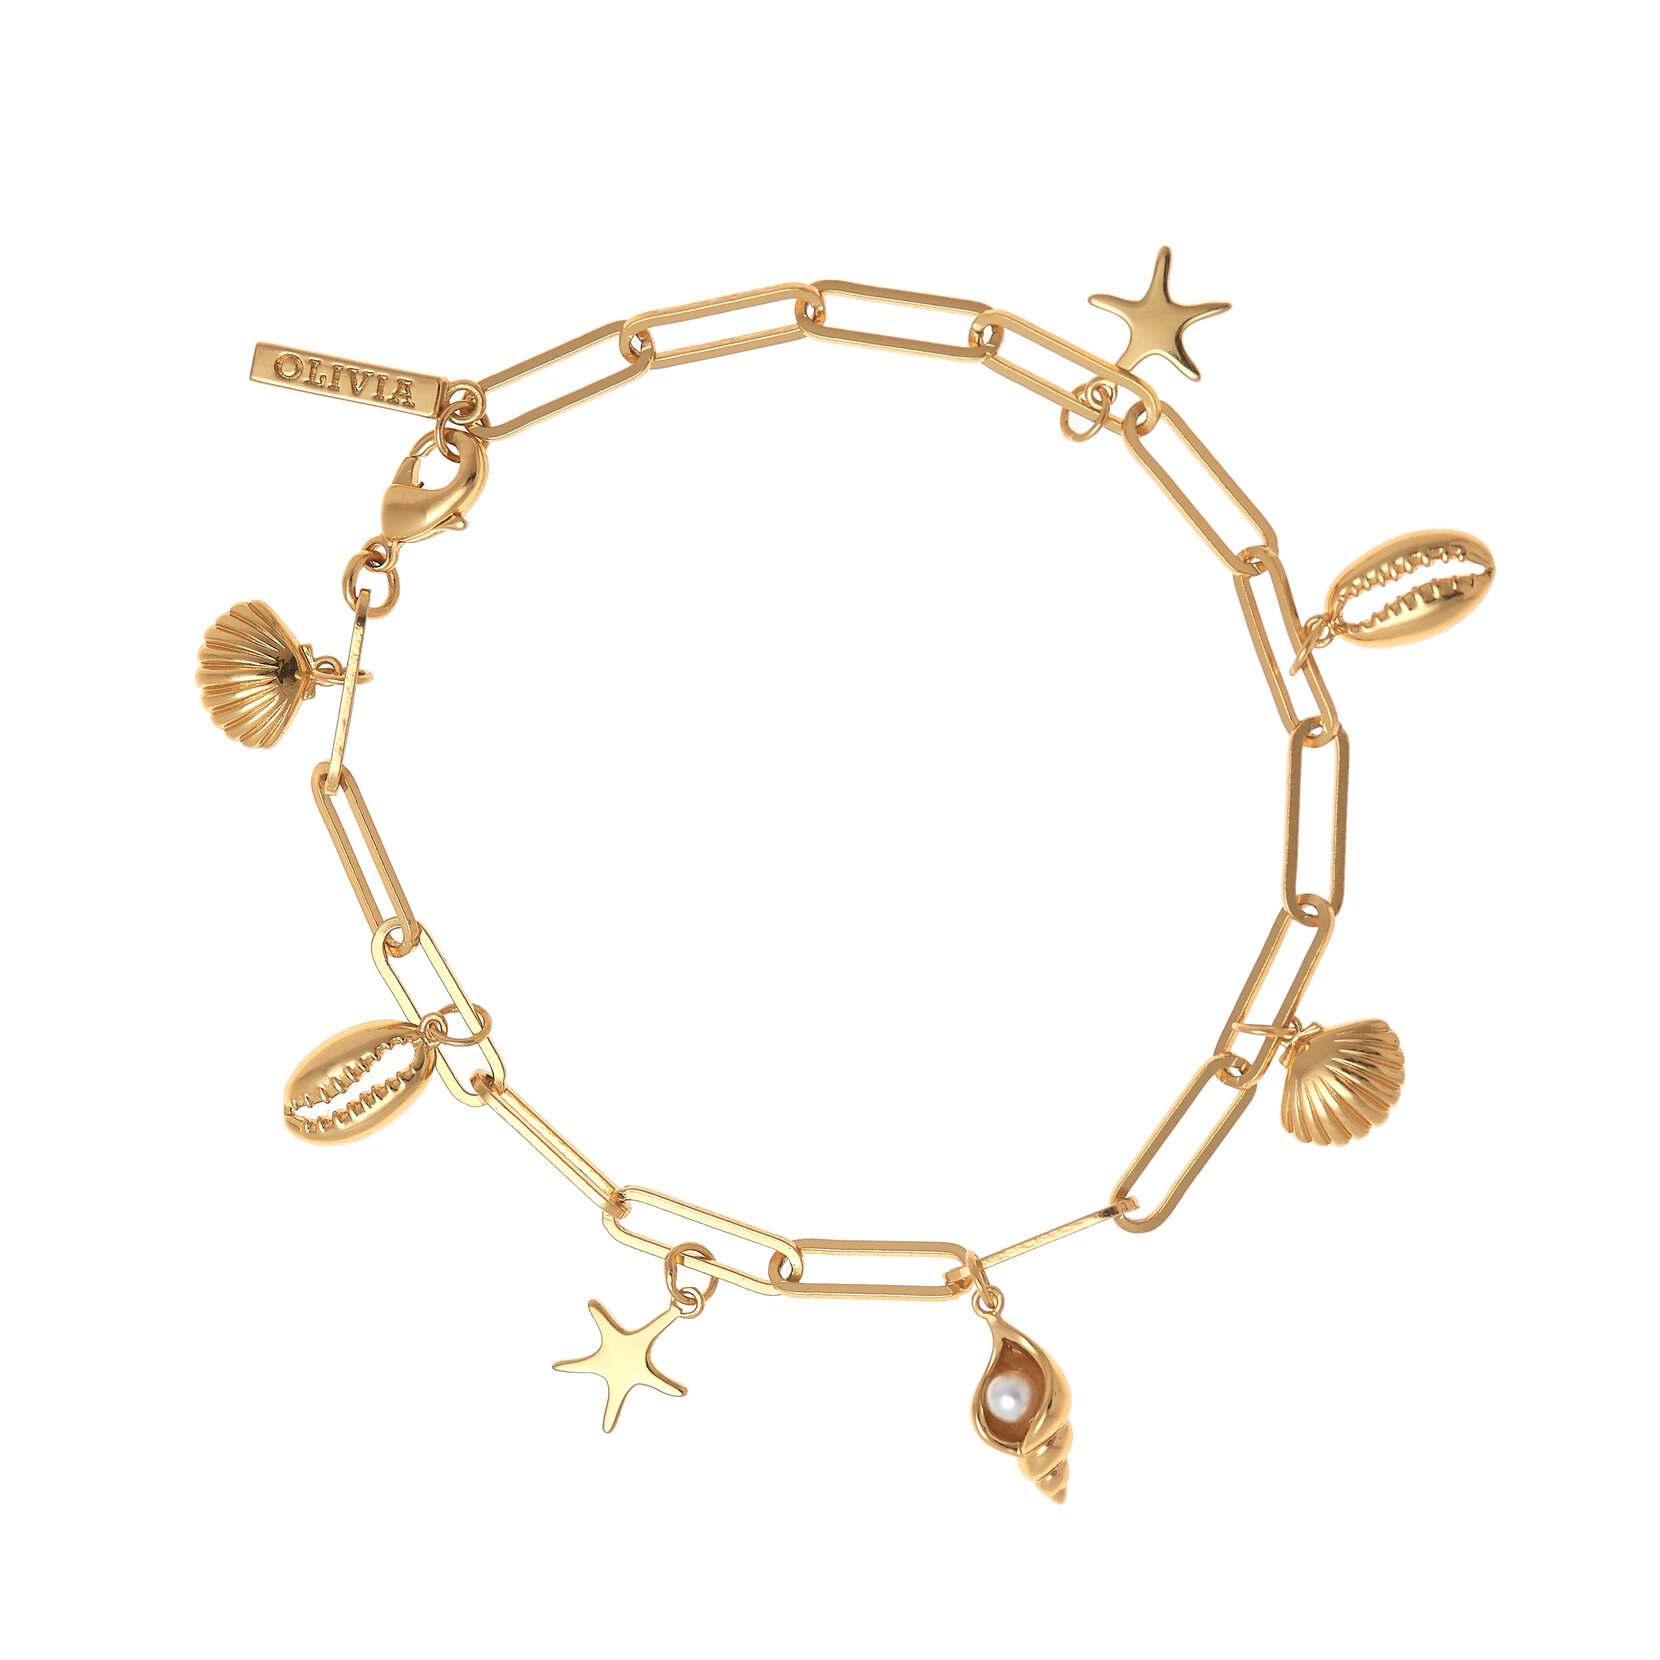 Gold By The Sea Charm Bracelet